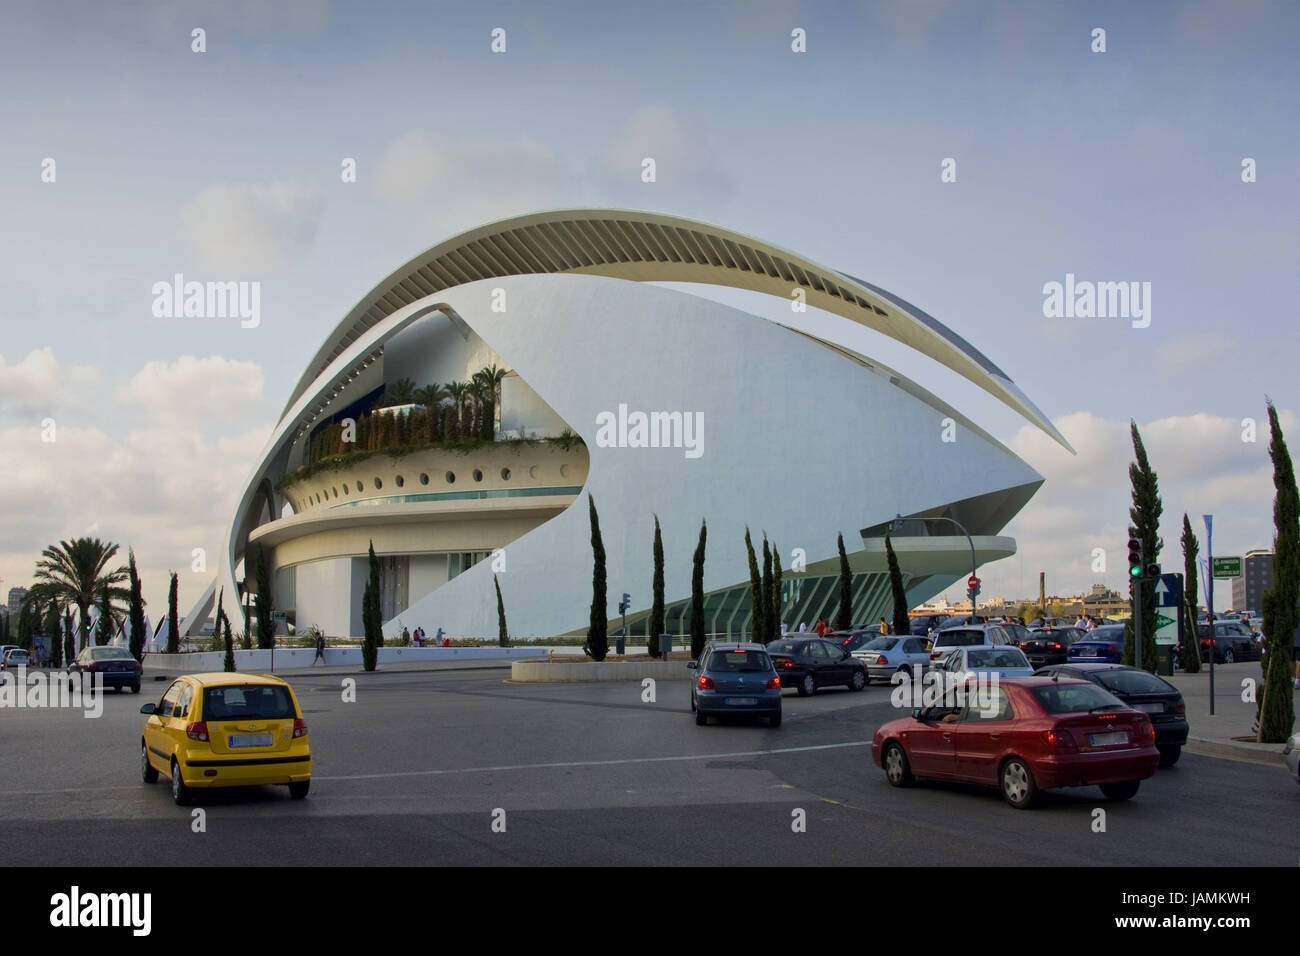 Spain,Valencia,Science centre,'town of the arts and the sciences',Europe,Catalonia,town,building,entertainment,structure,architecture,modern,exhibit centre,opera-house,opera,music palace,street,cars,street scene,outside, Stock Photo